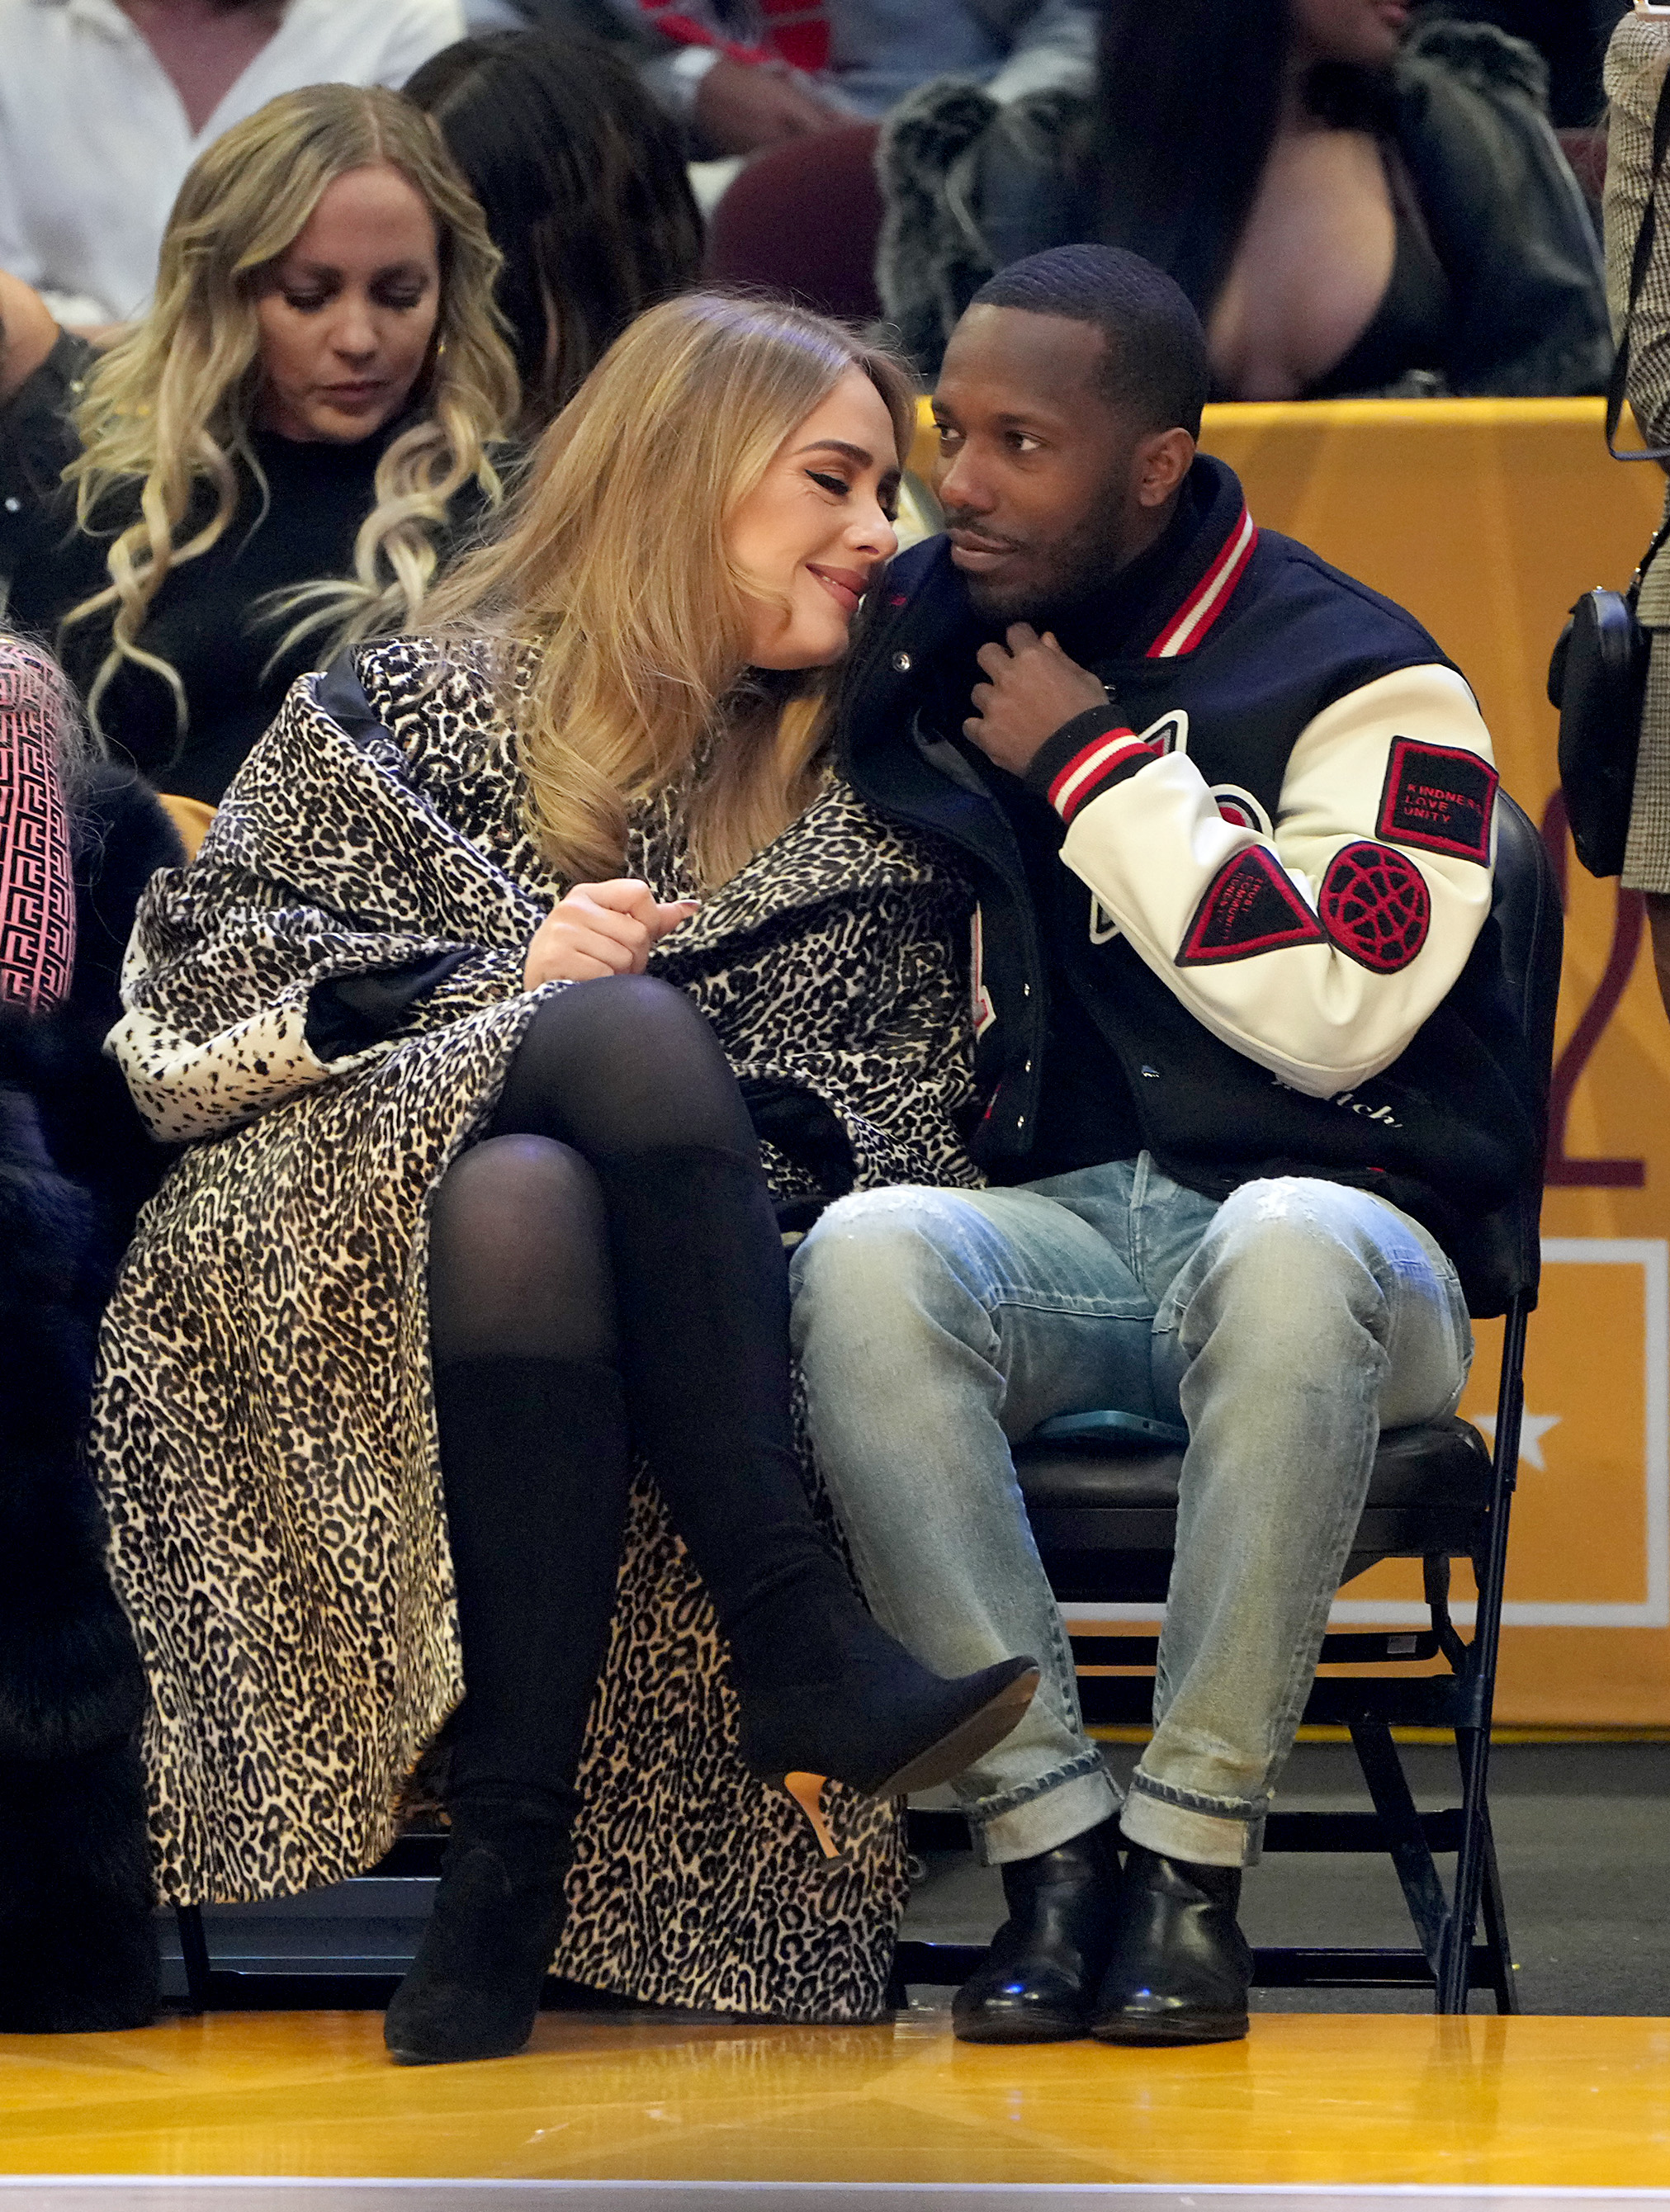 Adele and Rich Paul attend the NBA All-Star Game in Cleveland, Ohio on February 20, 2022 | Source: Getty Images